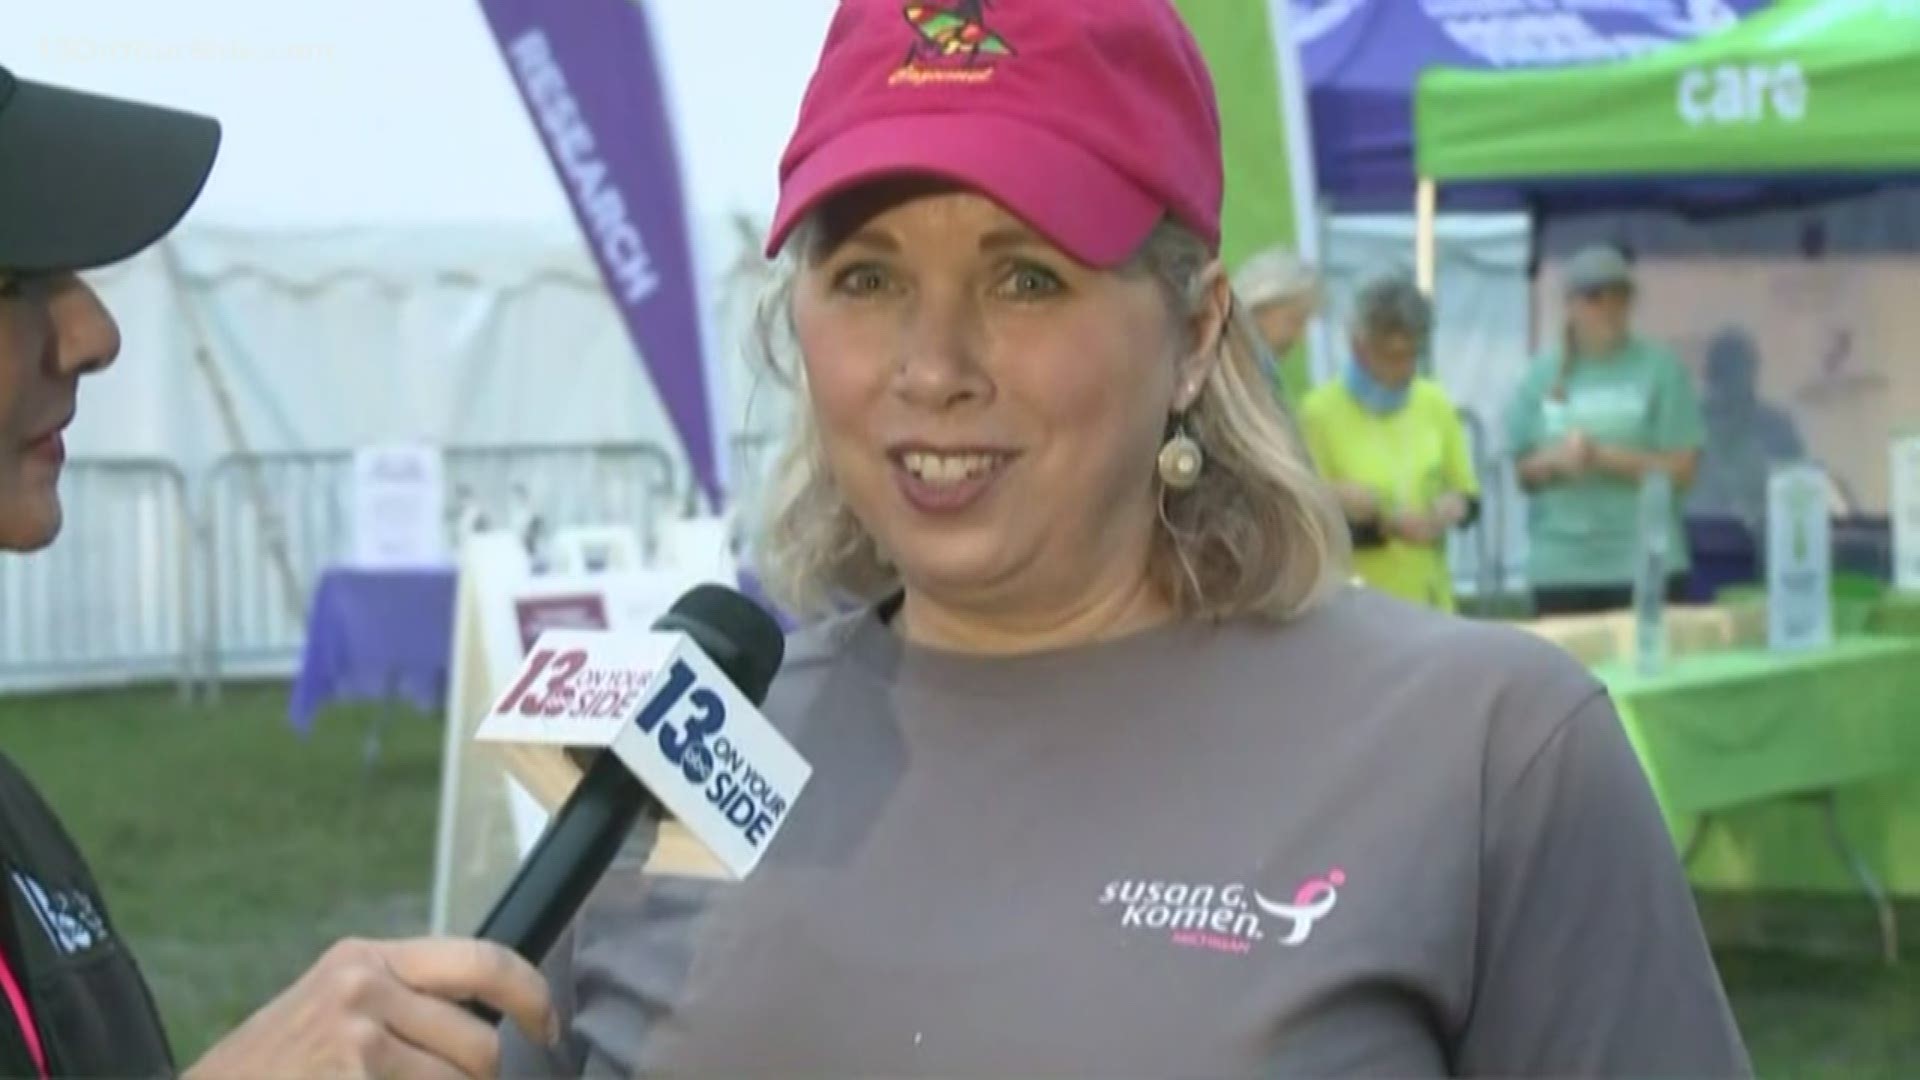 The More Than Pink Walk raises money for breast cancer research.